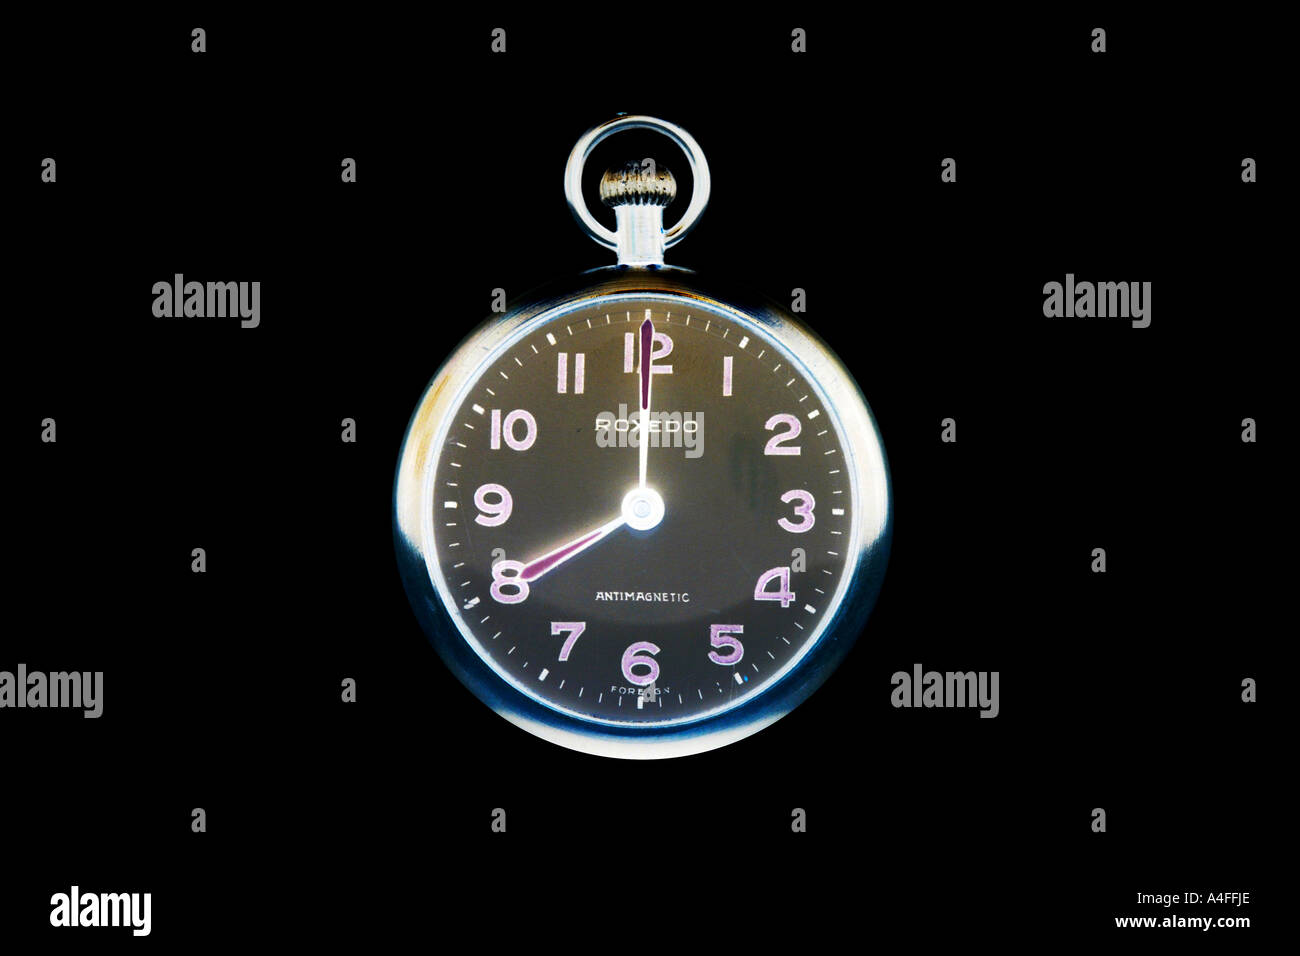 Pocketwatch at 8 o'clock against a black background. Stock Photo